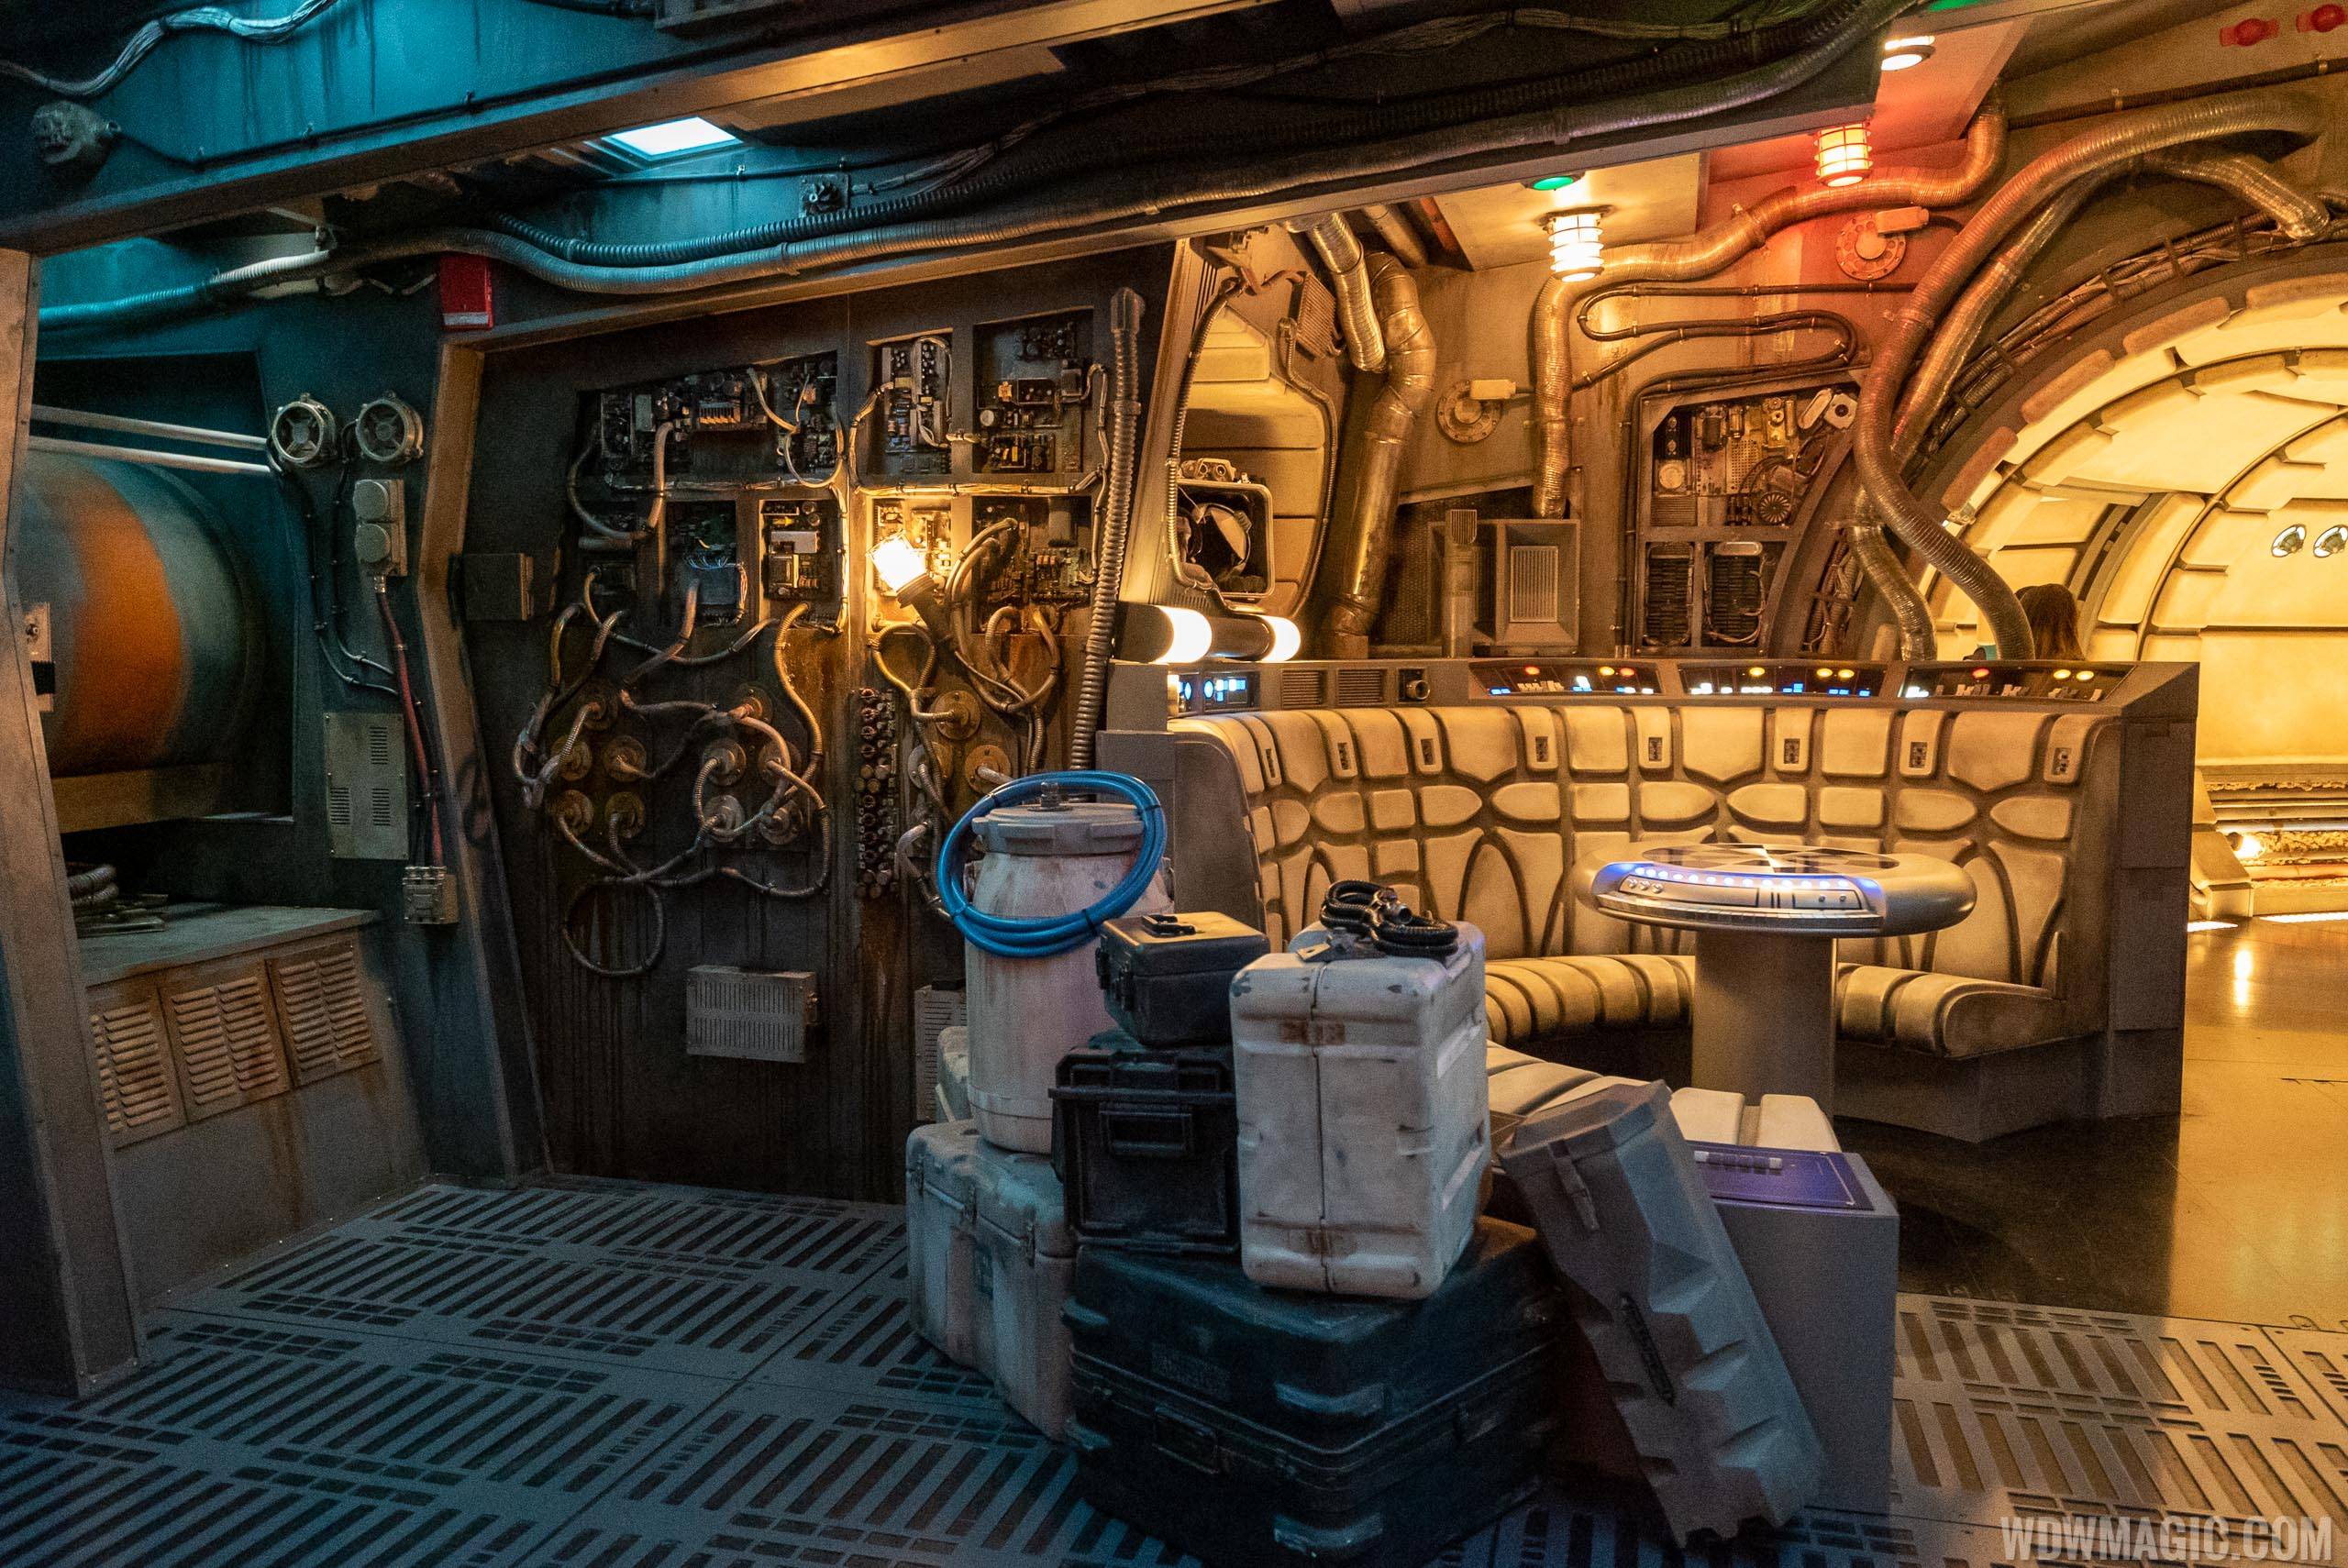 Onboard the Millennium Falcon Smugglers Run